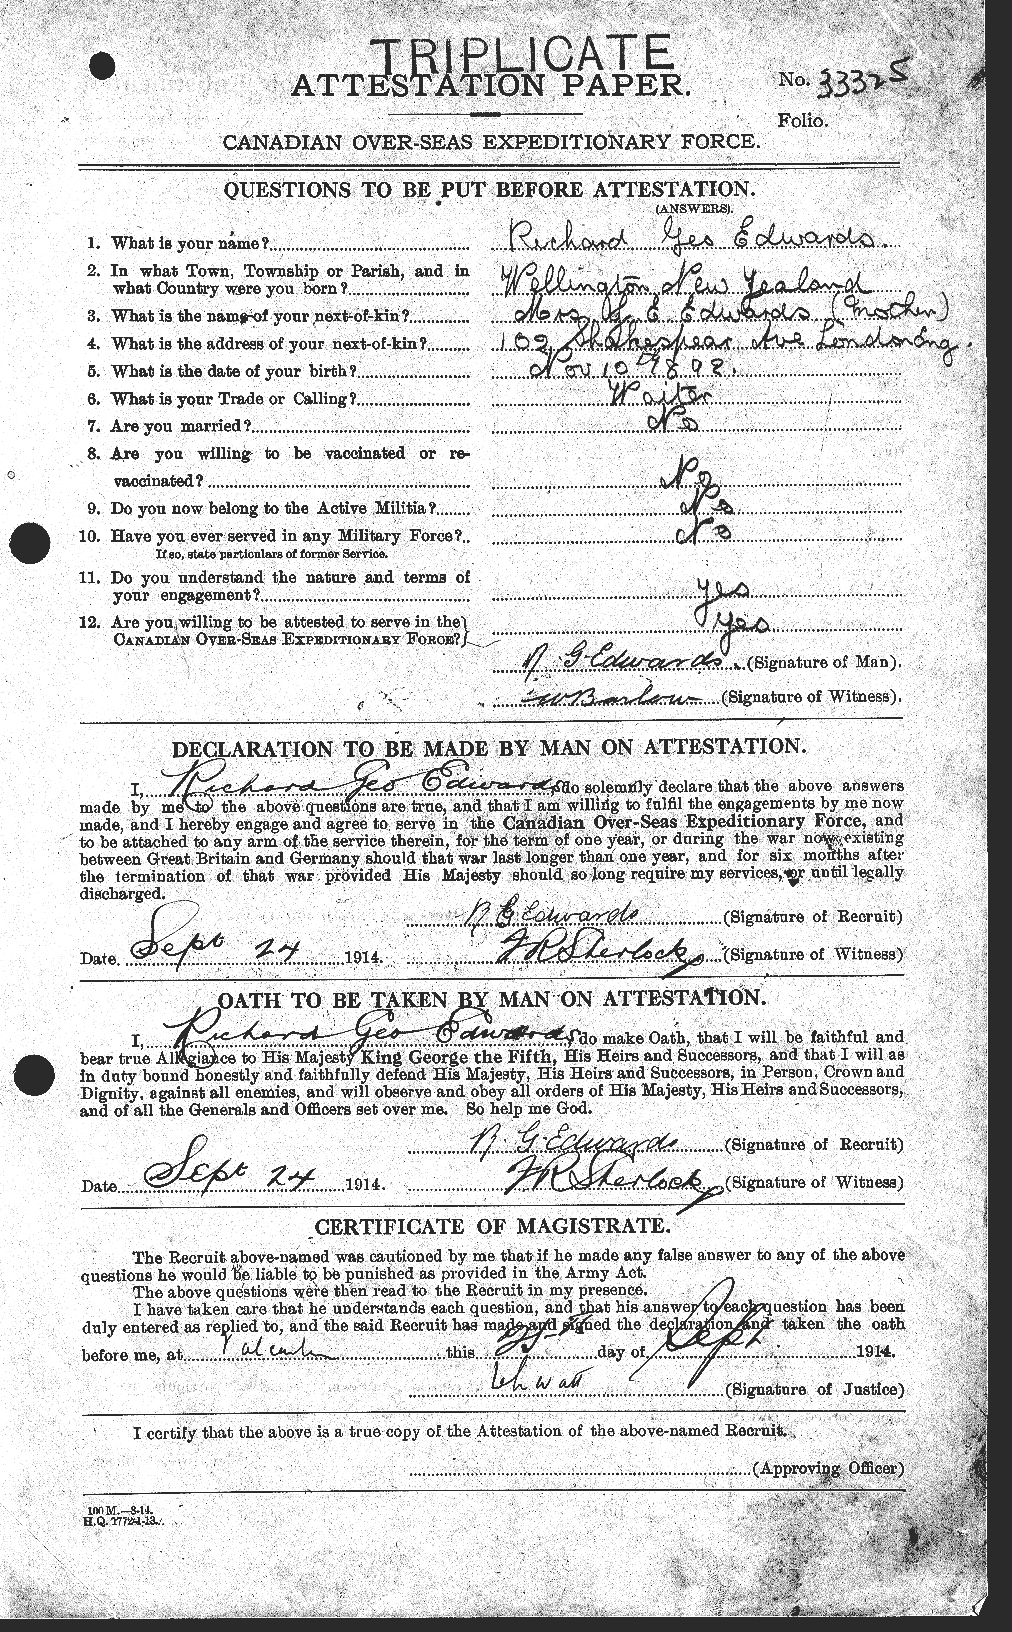 Personnel Records of the First World War - CEF 310260a